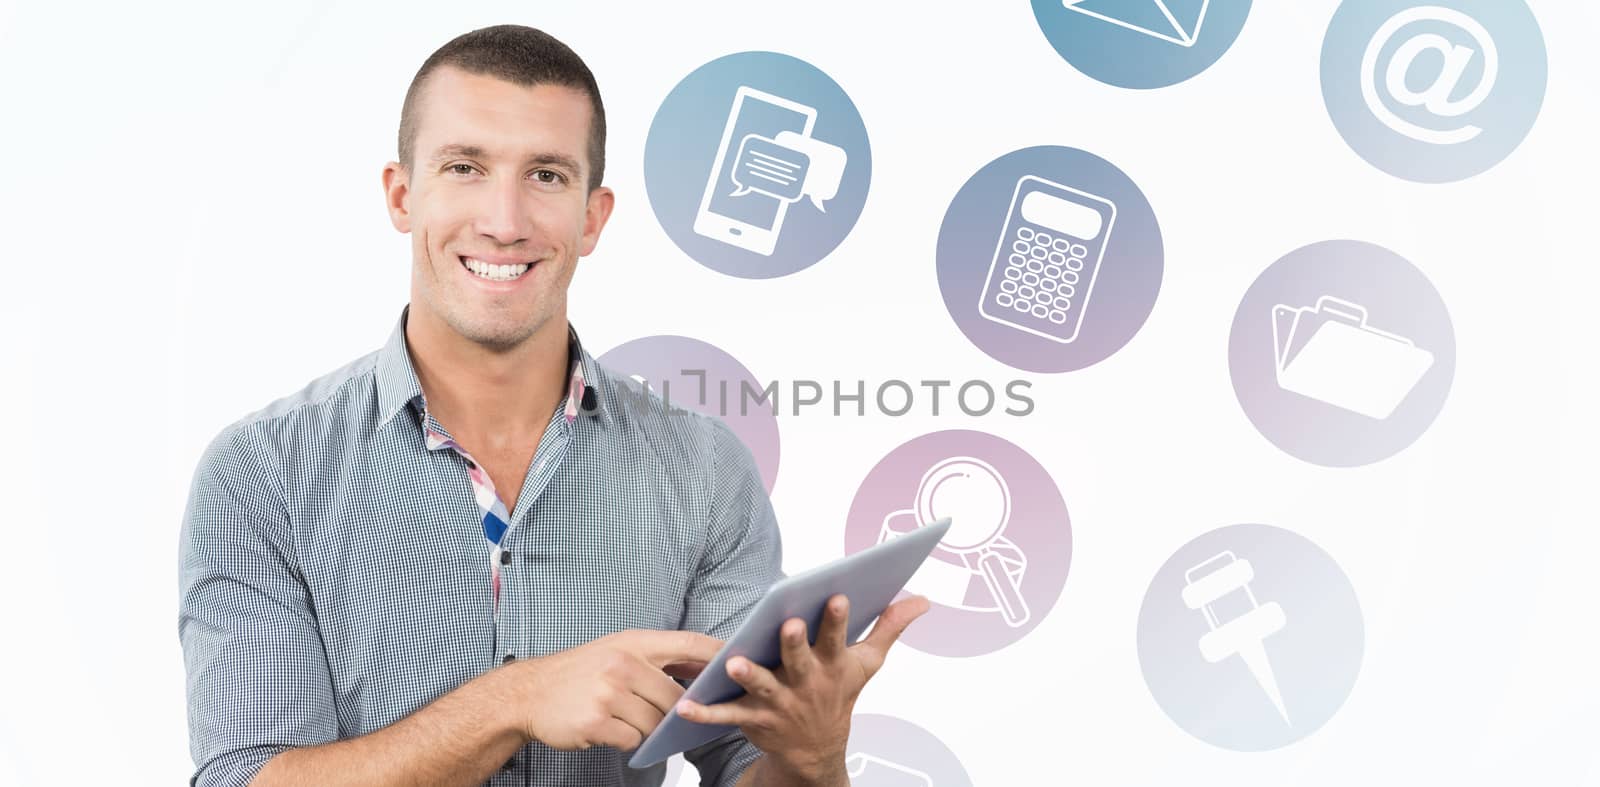 Smiling businessman using tablet computer over white background against telephone apps icons 